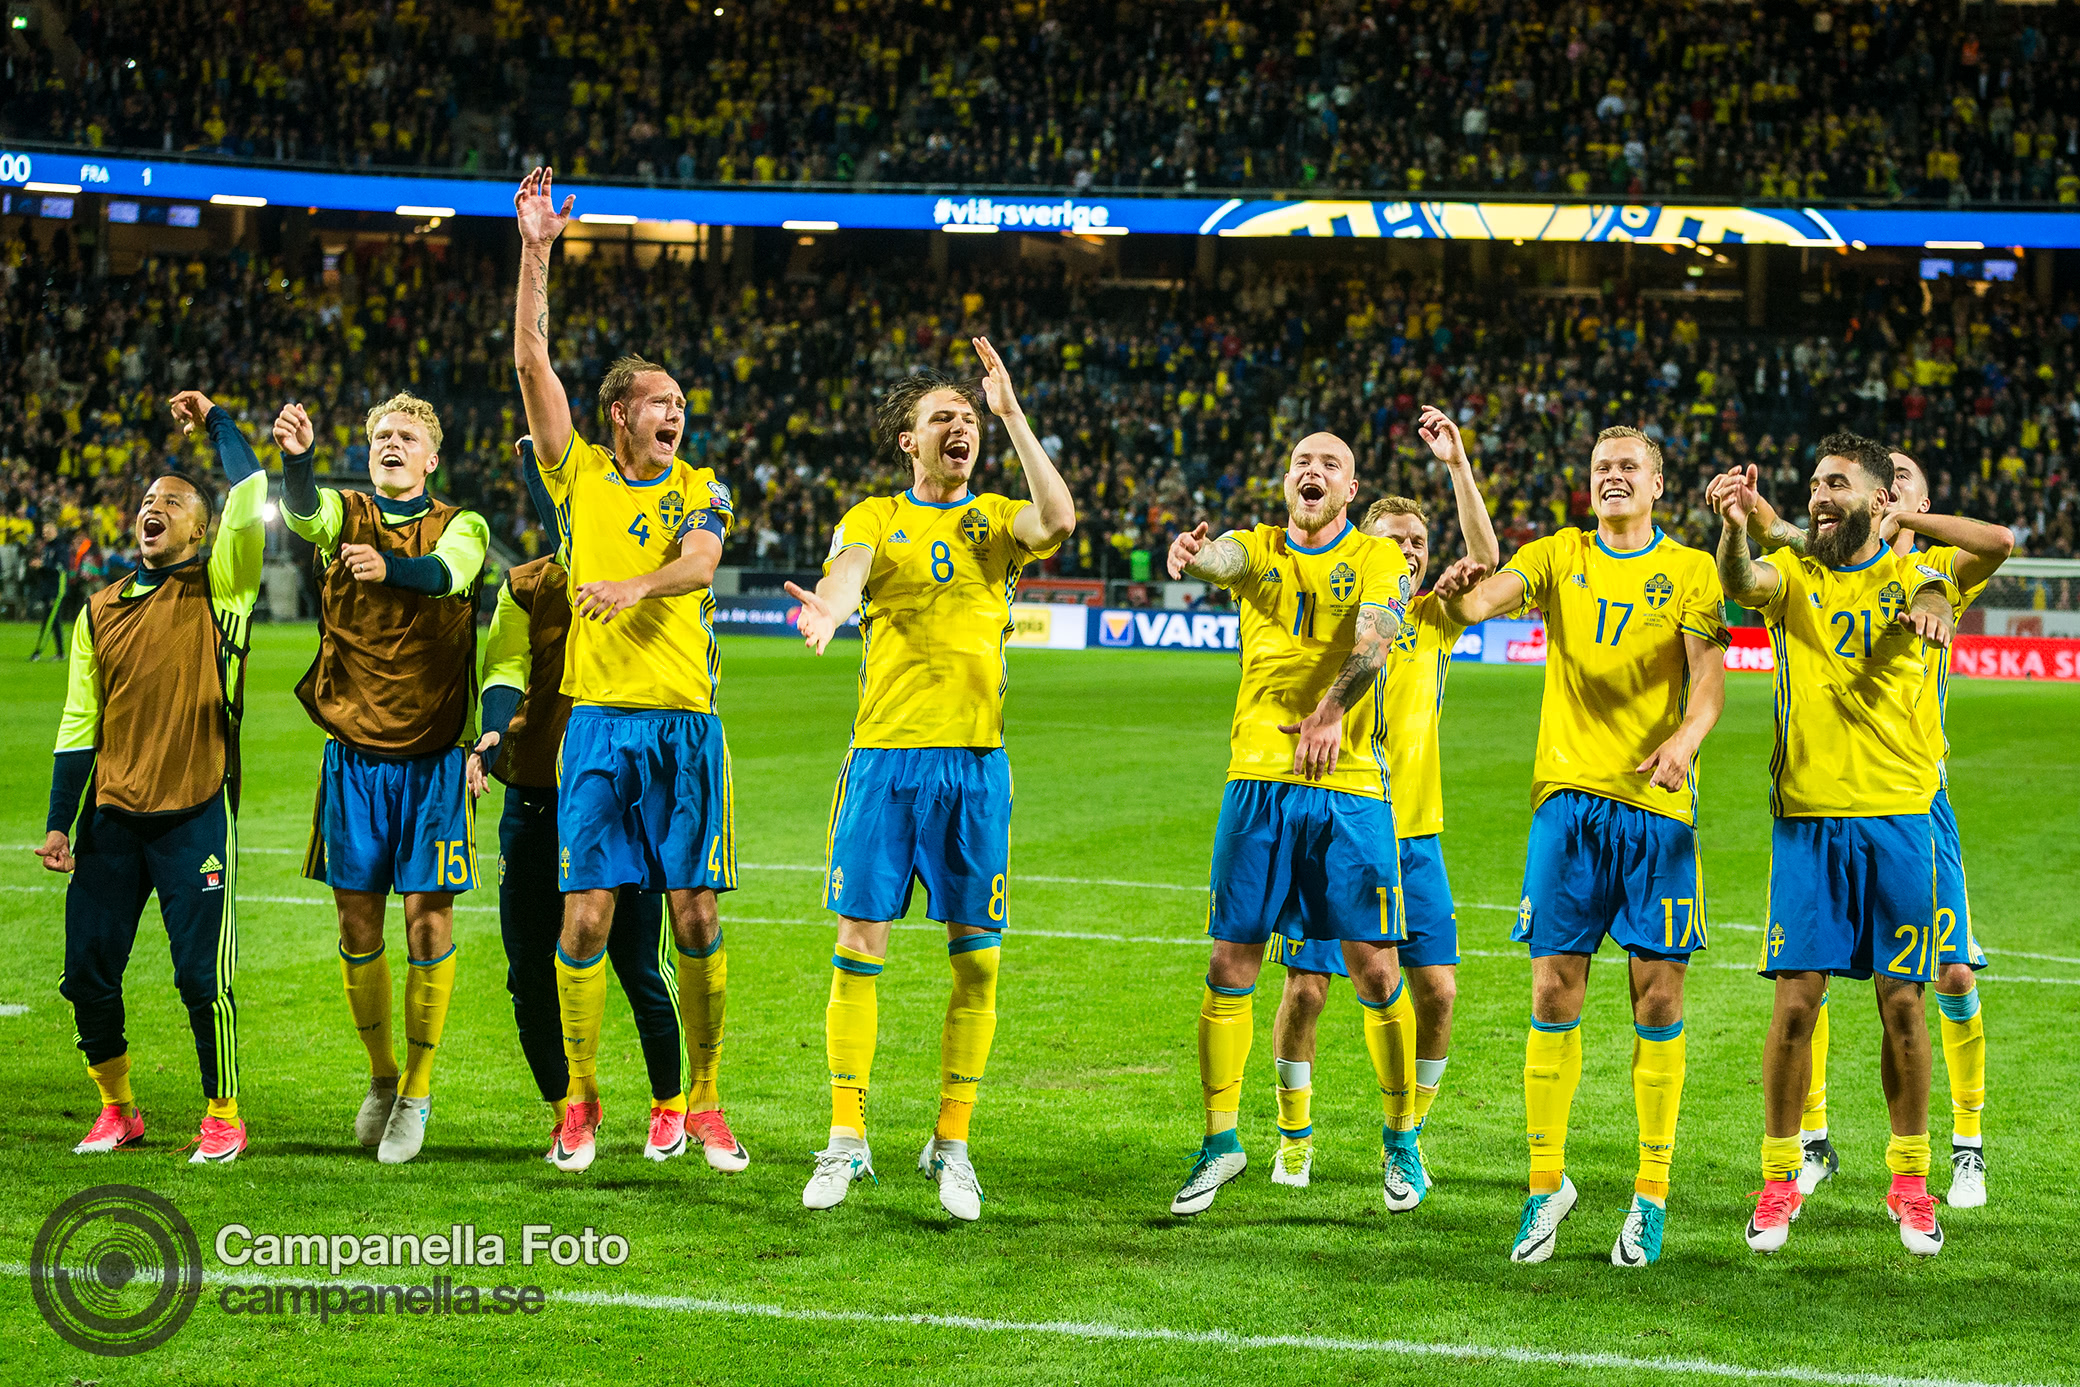 Sweden shocks France with last minute winner - Michael Campanella Photography